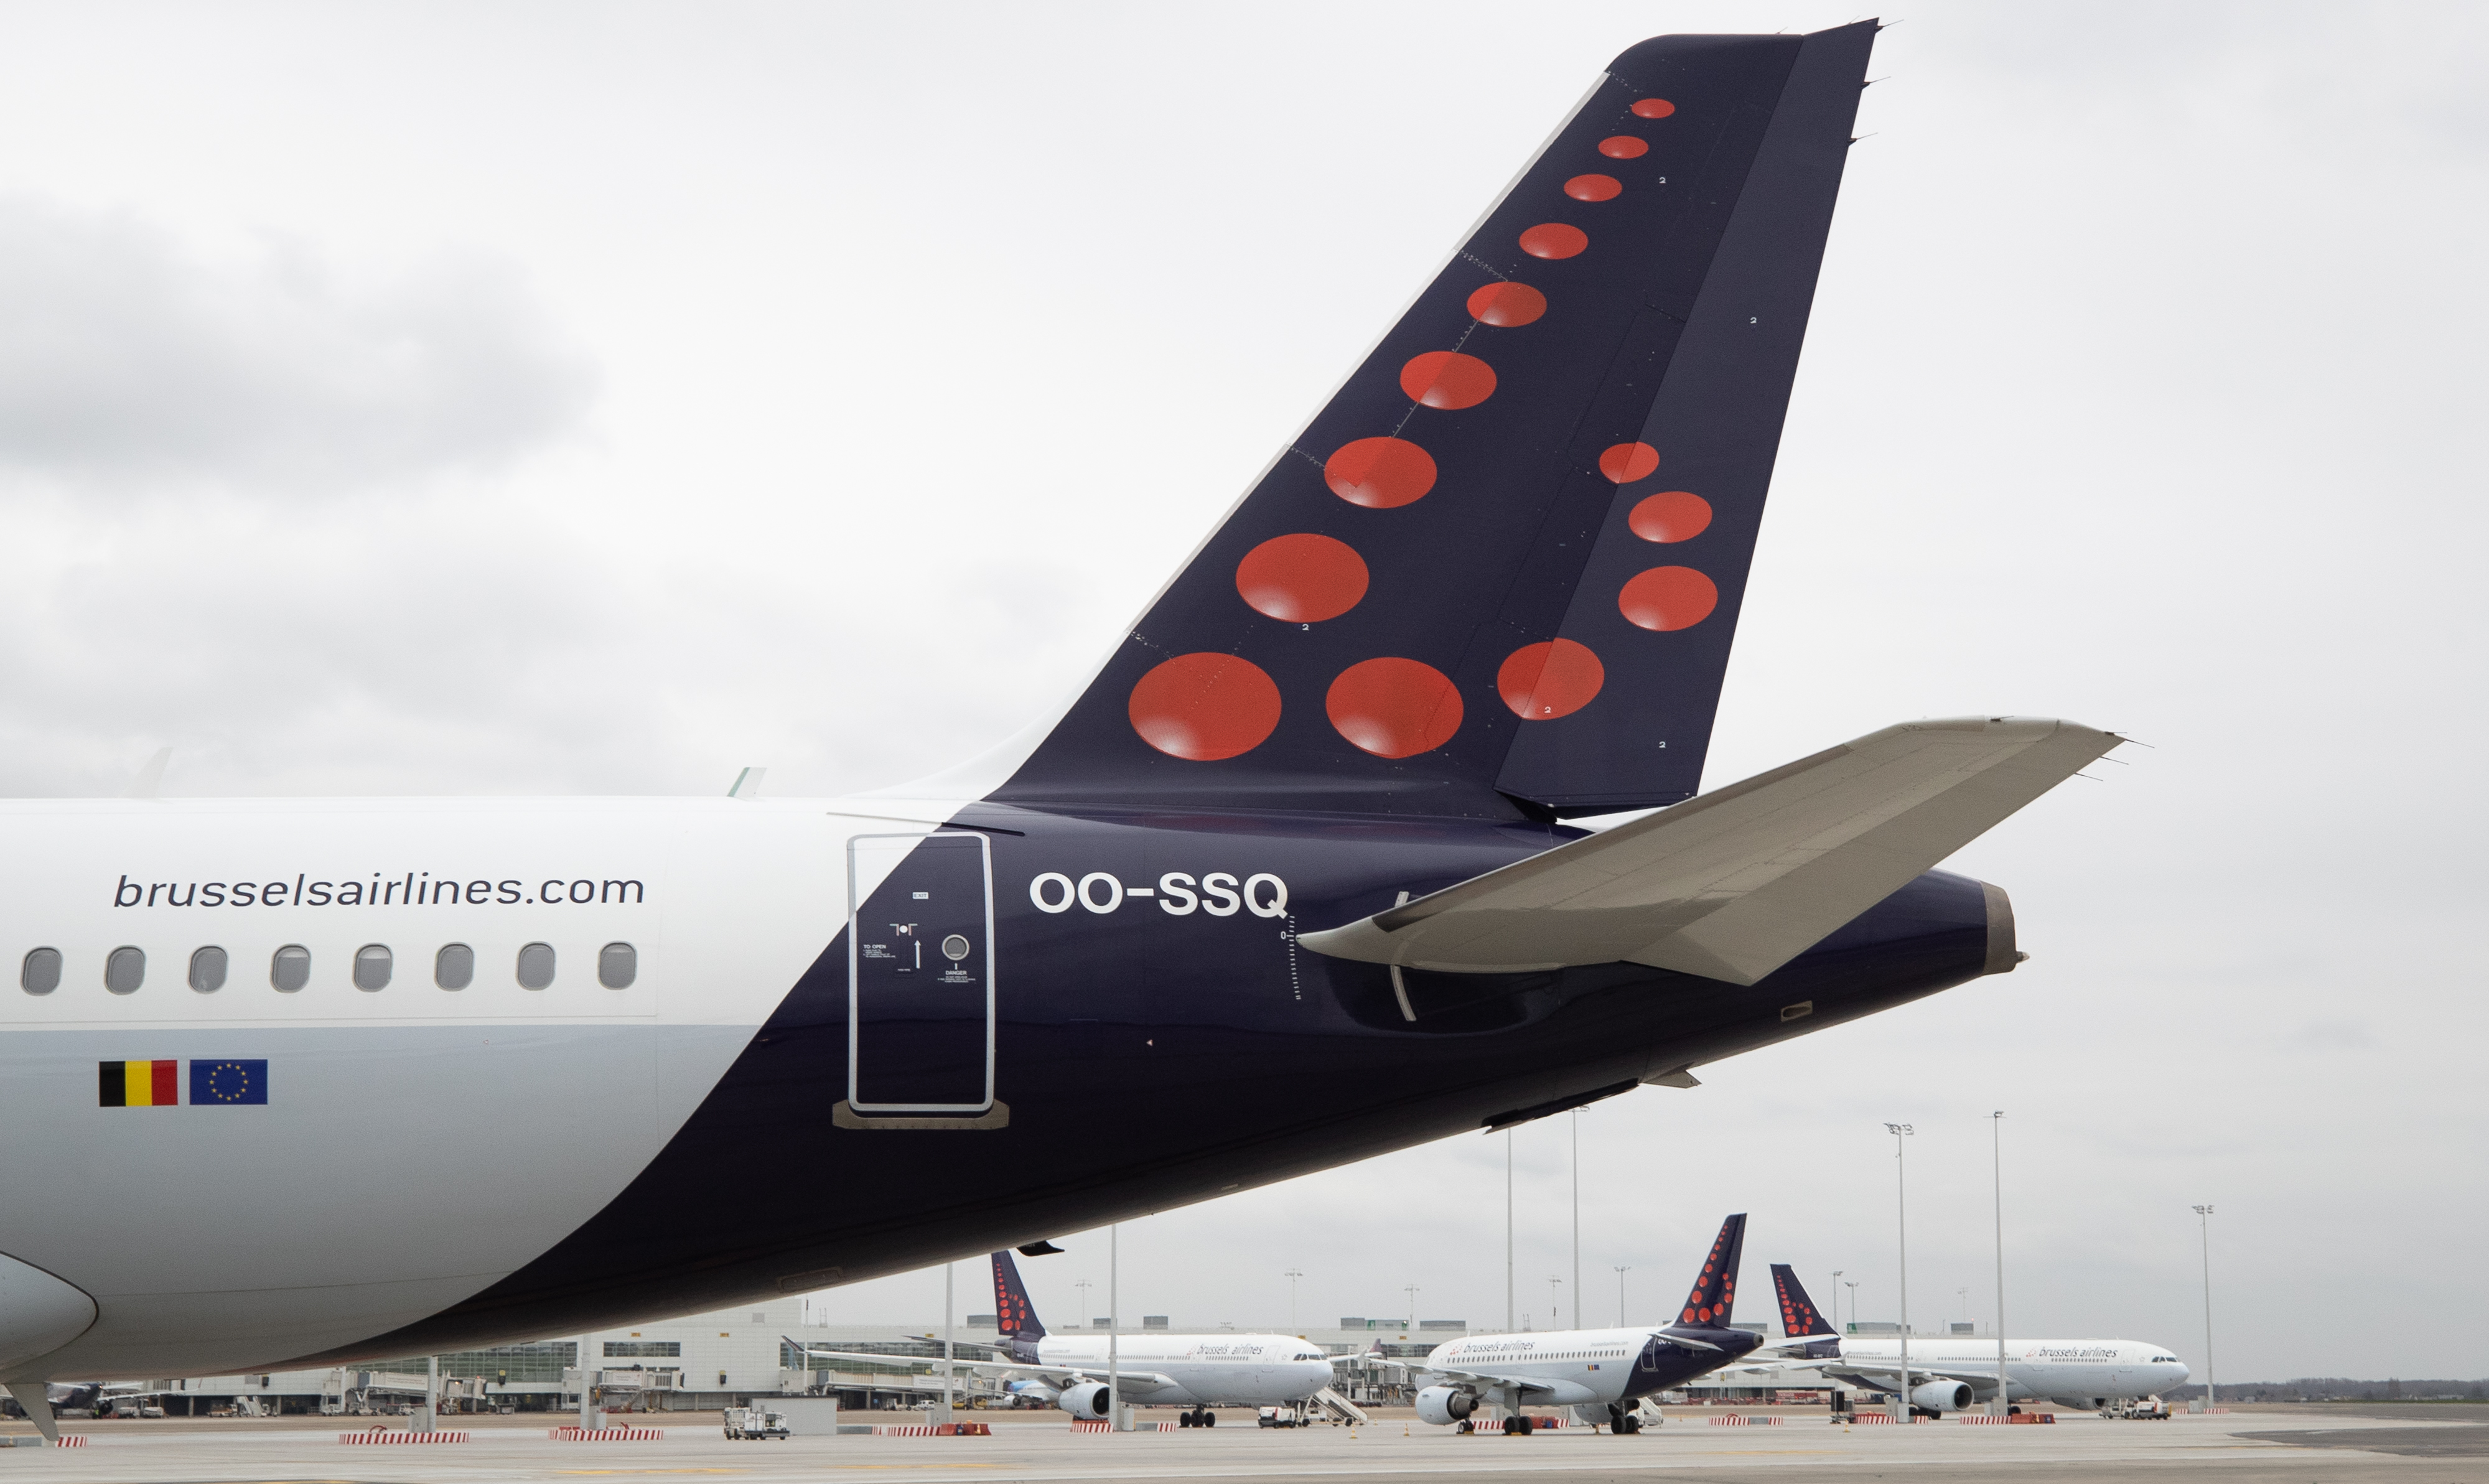 Egypt, Moroccco: Brussels Airlines ventures into “not recommended” destinations